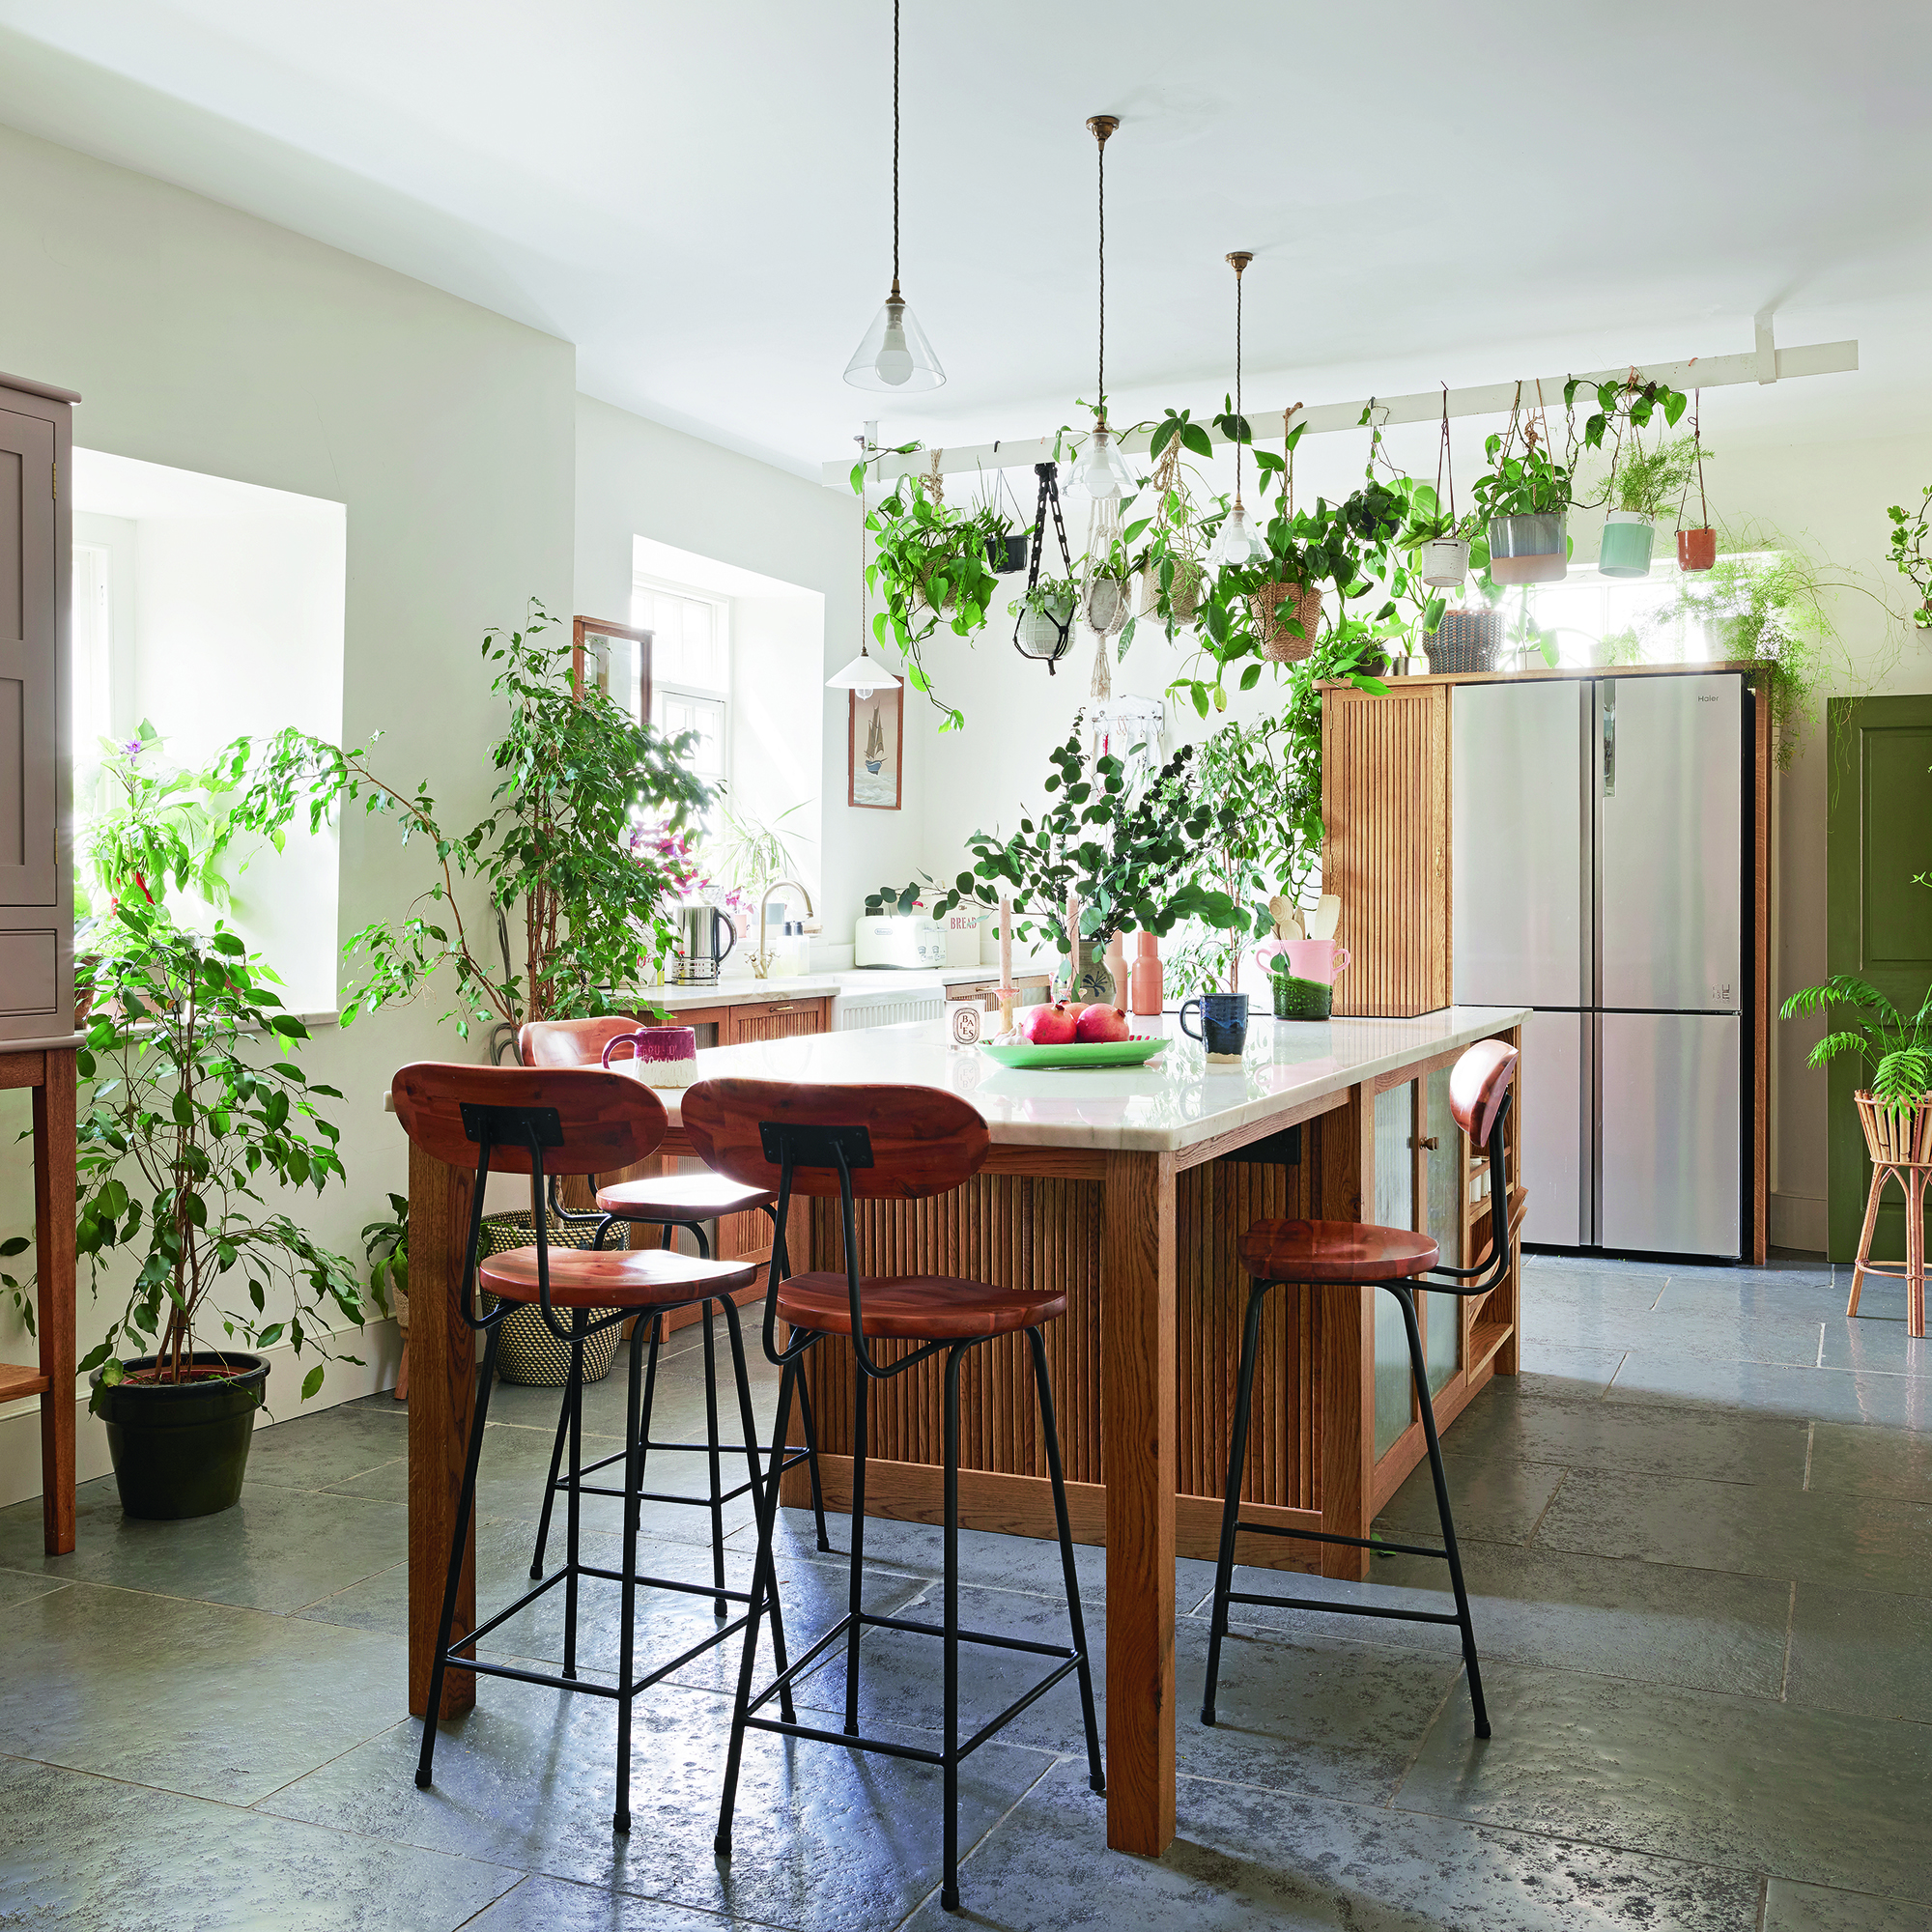 Kitchen with wooden ribbed cabinets, island and indoor plants